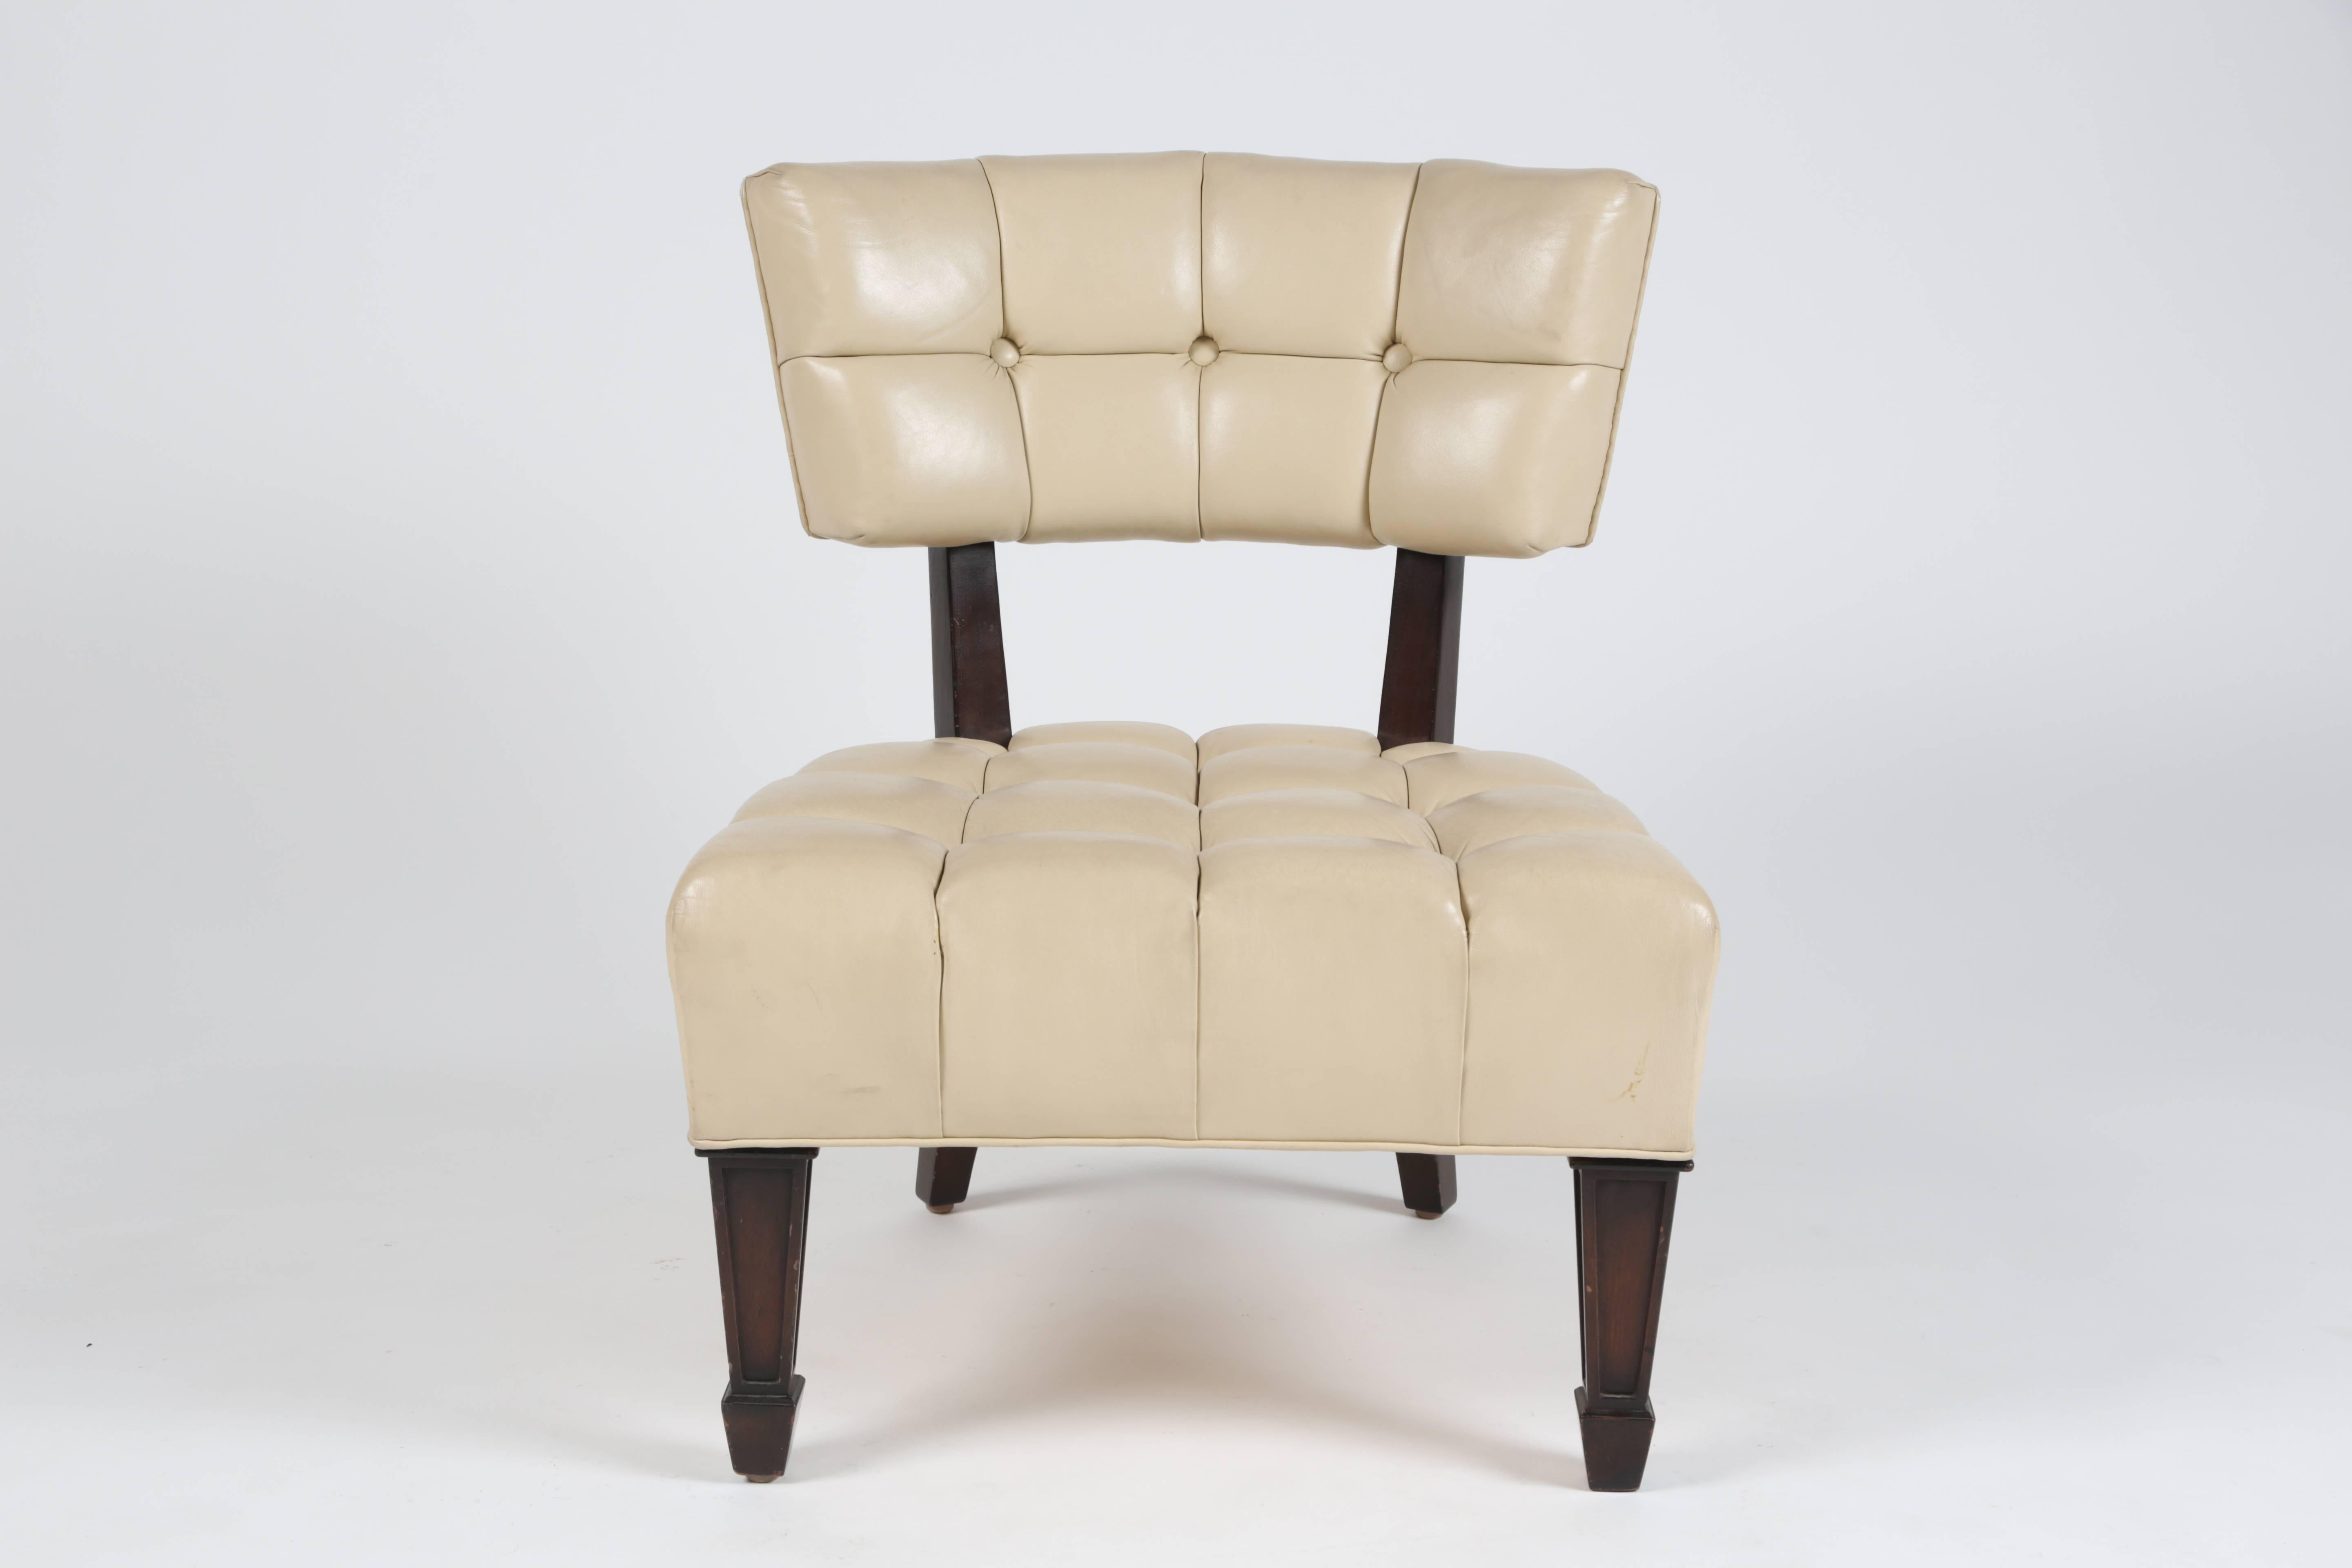 Mid-20th Century Pair of Tufted Leather Pull Up Chairs by William 